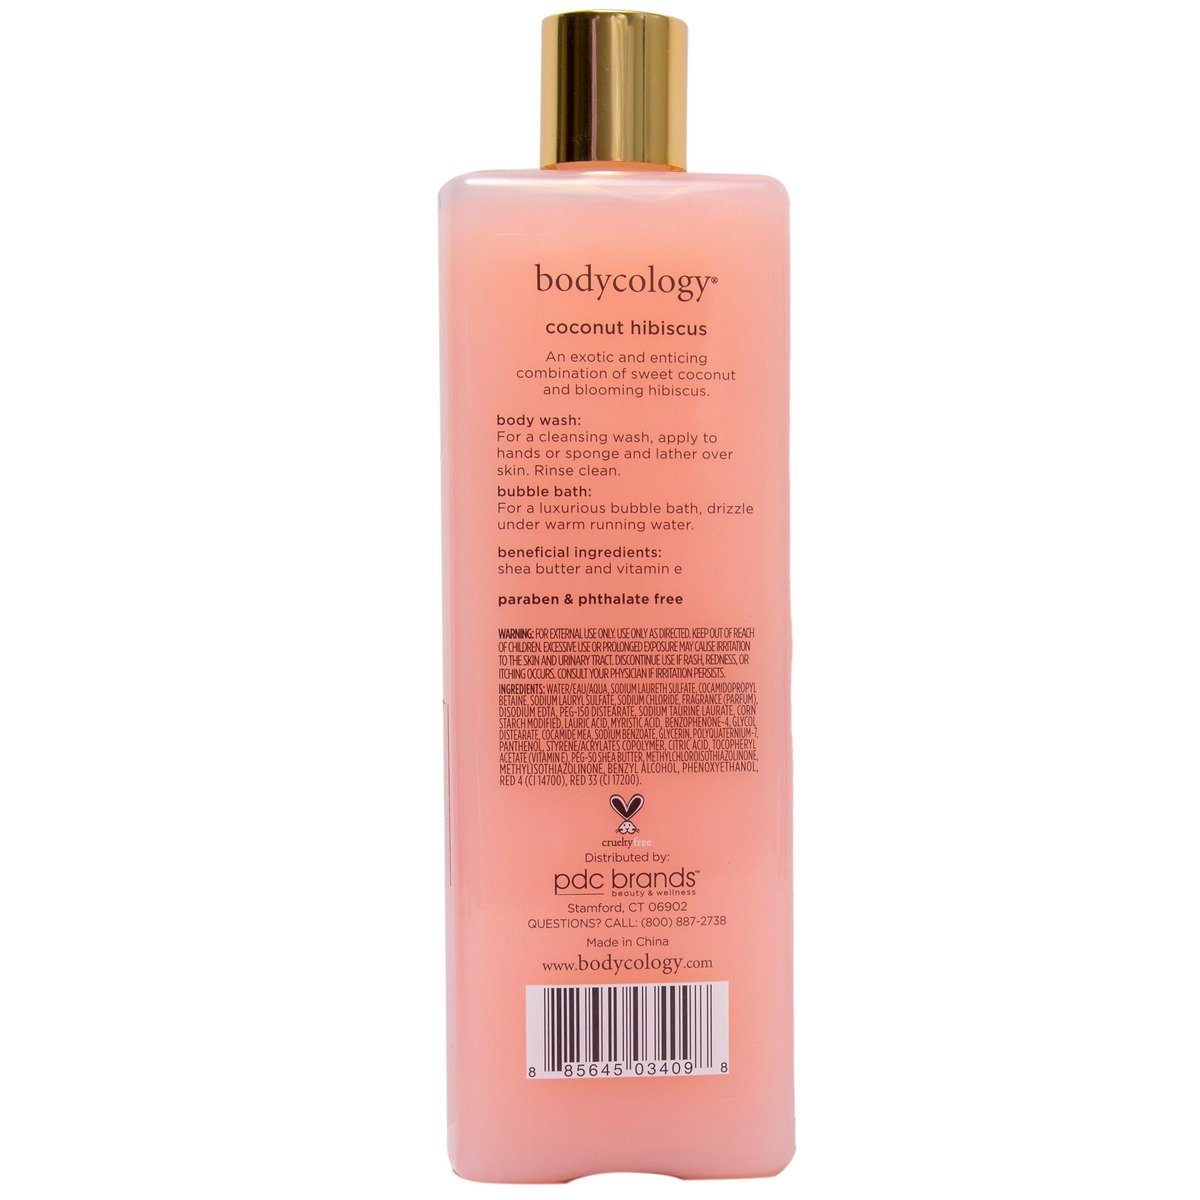 Bodycology Coconut Hibiscus Body Wash 473 ml